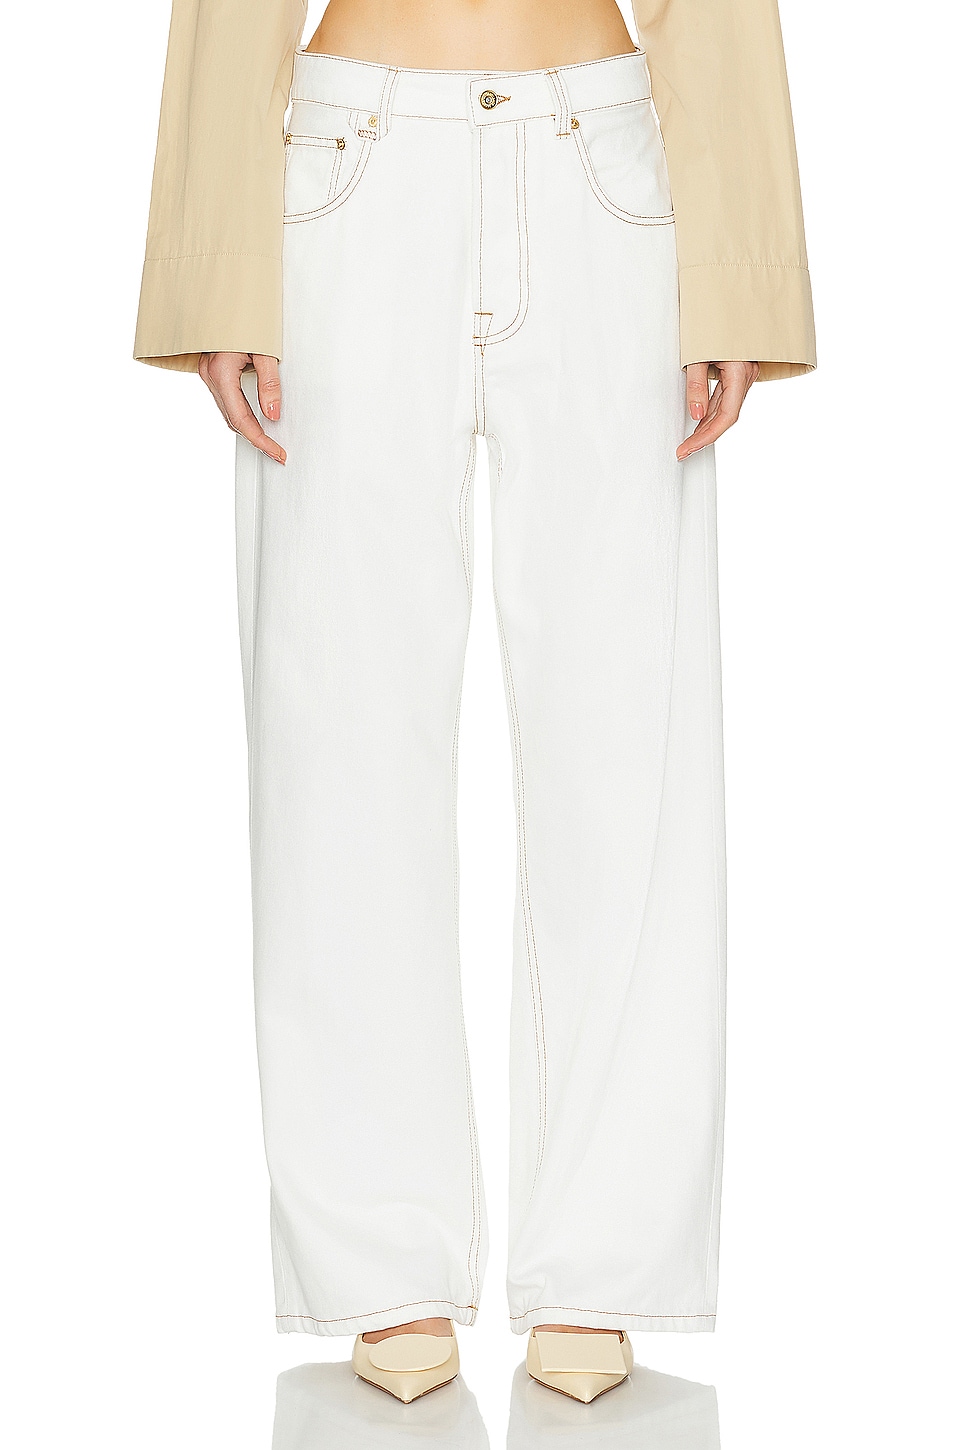 Image 1 of JACQUEMUS Le De Nimes Large in Off White & Tabac